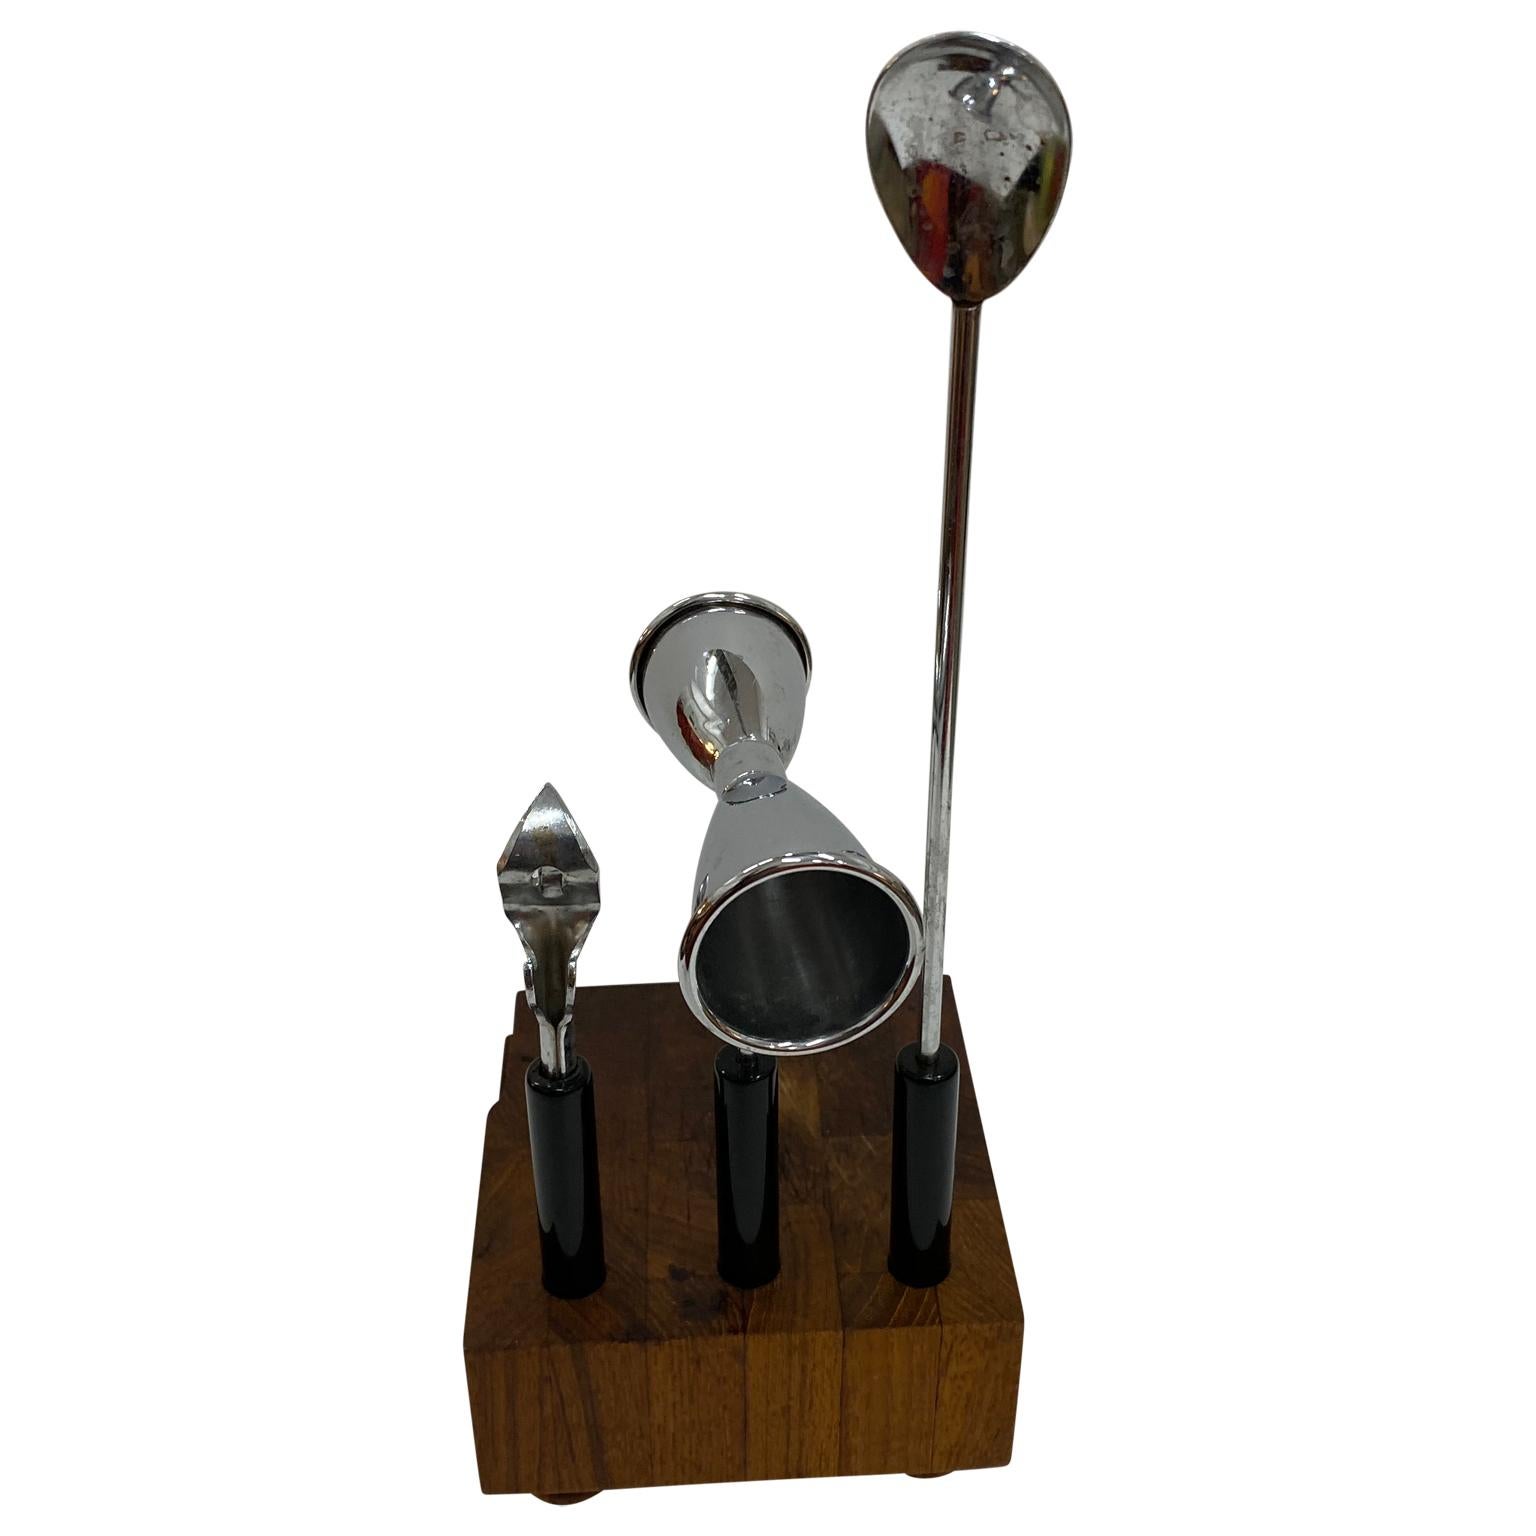 Hong Kong Mid-Century Modern Teak and Steel Cocktail Mixing Set, Signed by Ernest Sohn